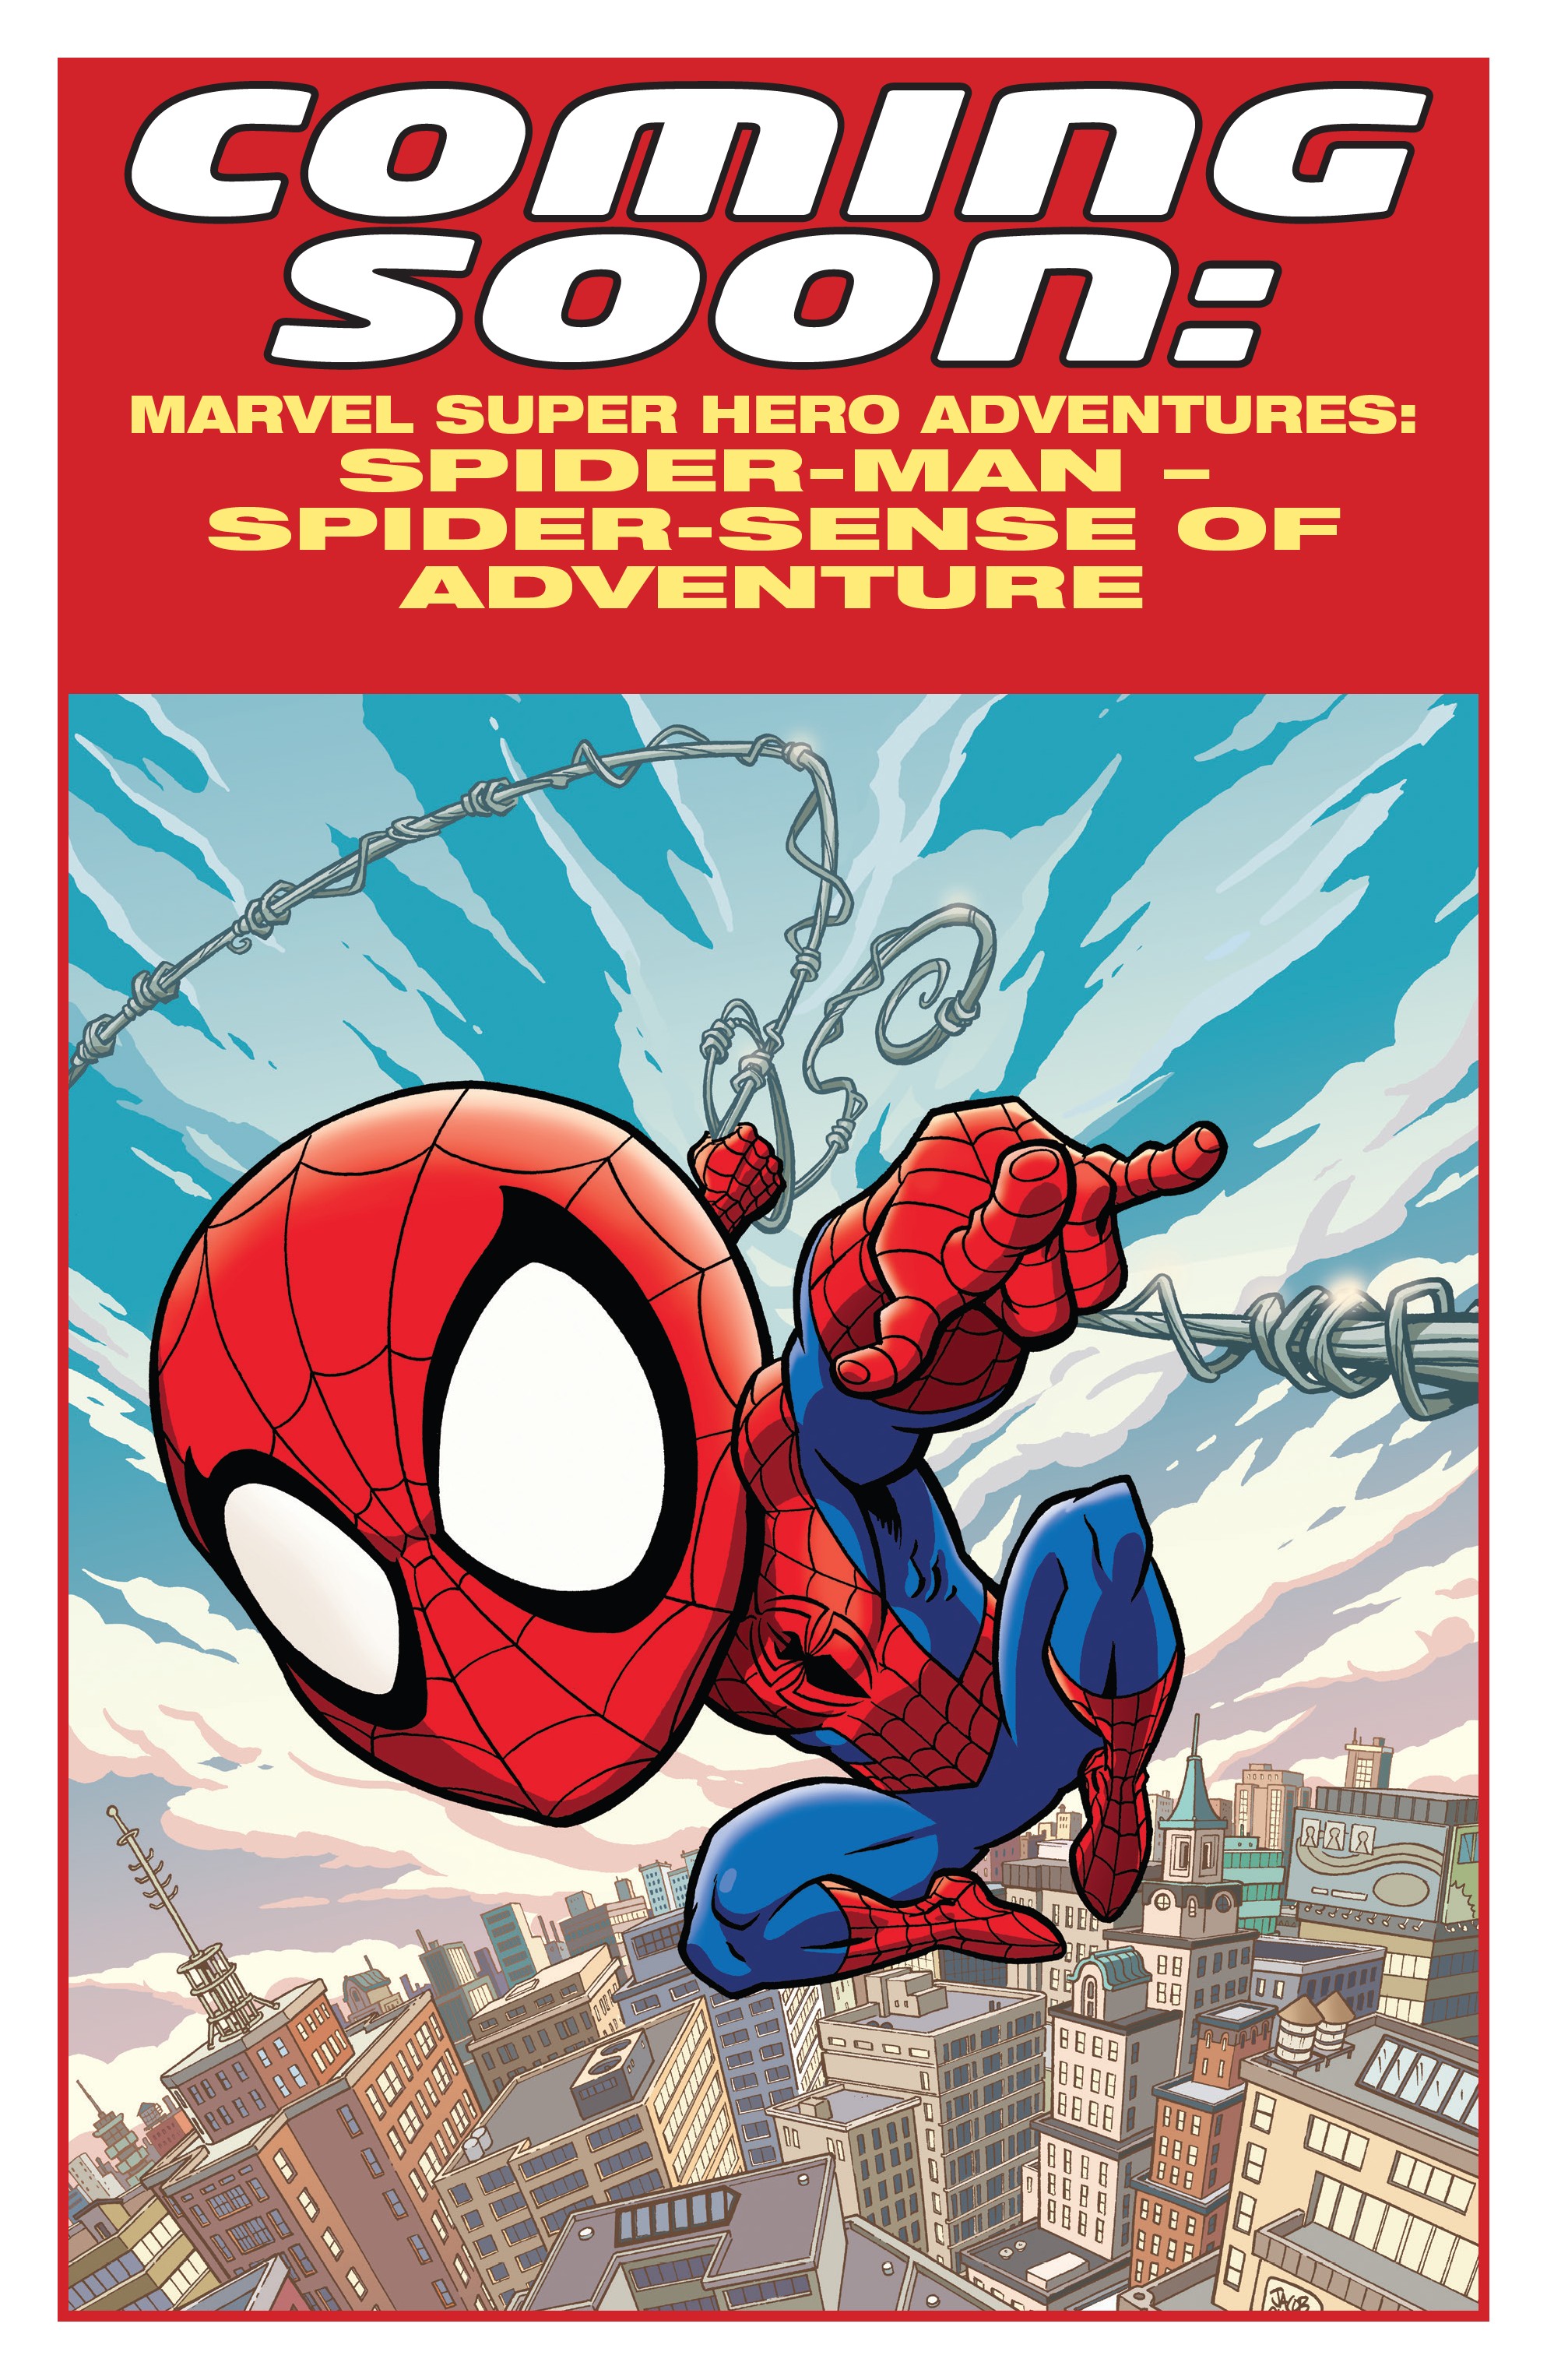 Read online Marvel Super Hero Adventures: Spider-Man – Web of Intrigue comic -  Issue # Full - 23